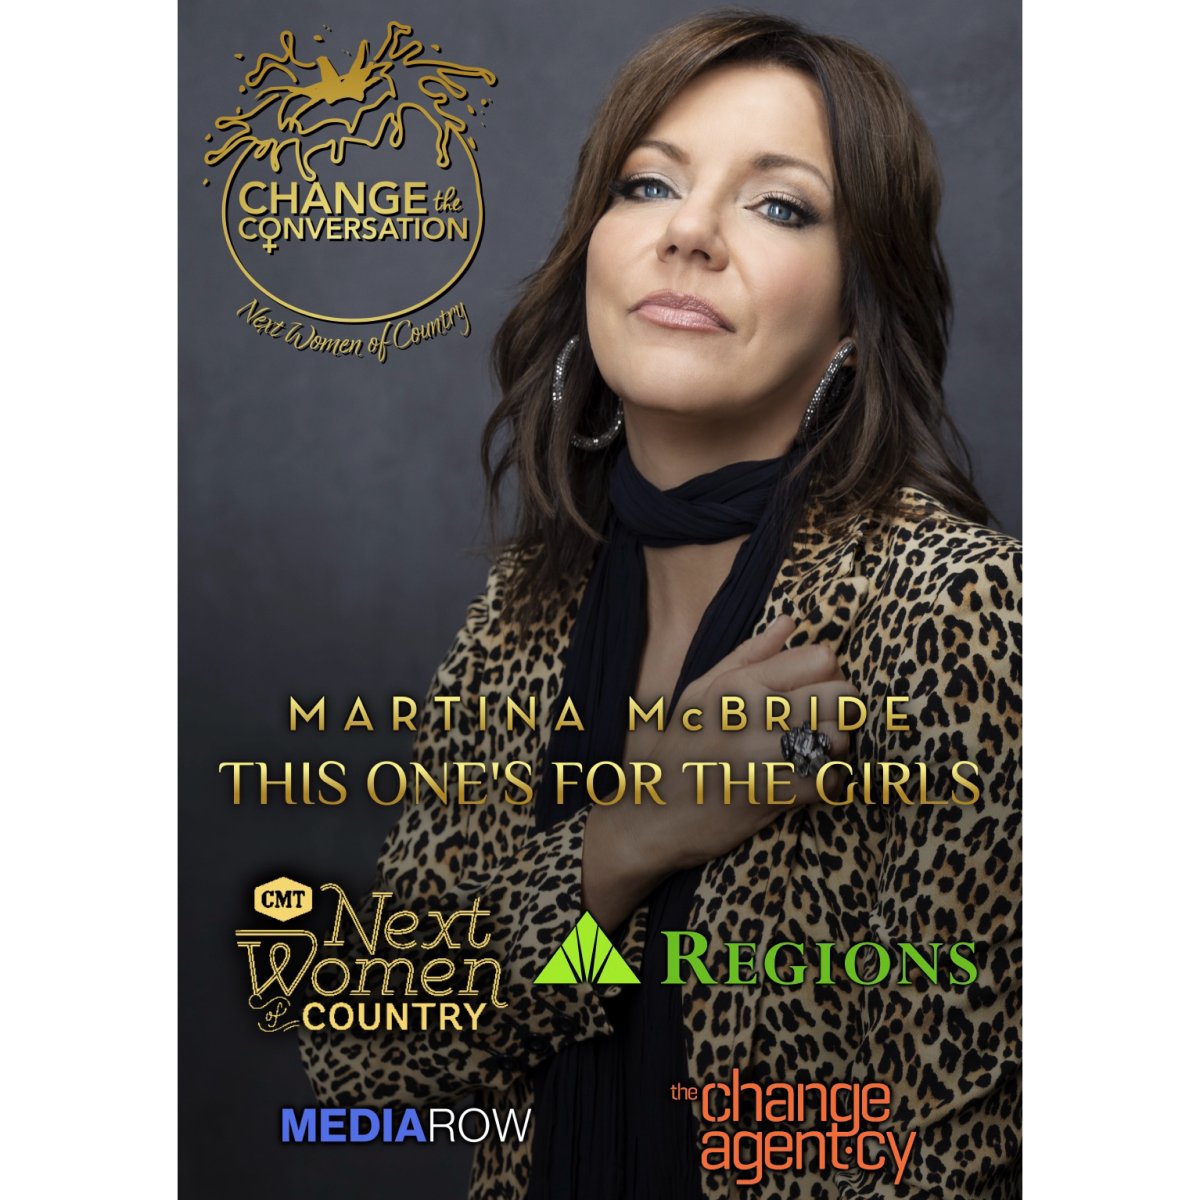 Leap into Women's History Month with us! @ChangeTheConvo & @MartinaMcBride will showcase a different CMT Next Women Of Country artist every day in March, leading up to our 'A Conversation With Martina' event on April 17 @BMI. #ChangeTheConversation #MartinaMcBride #CMTNextWomen